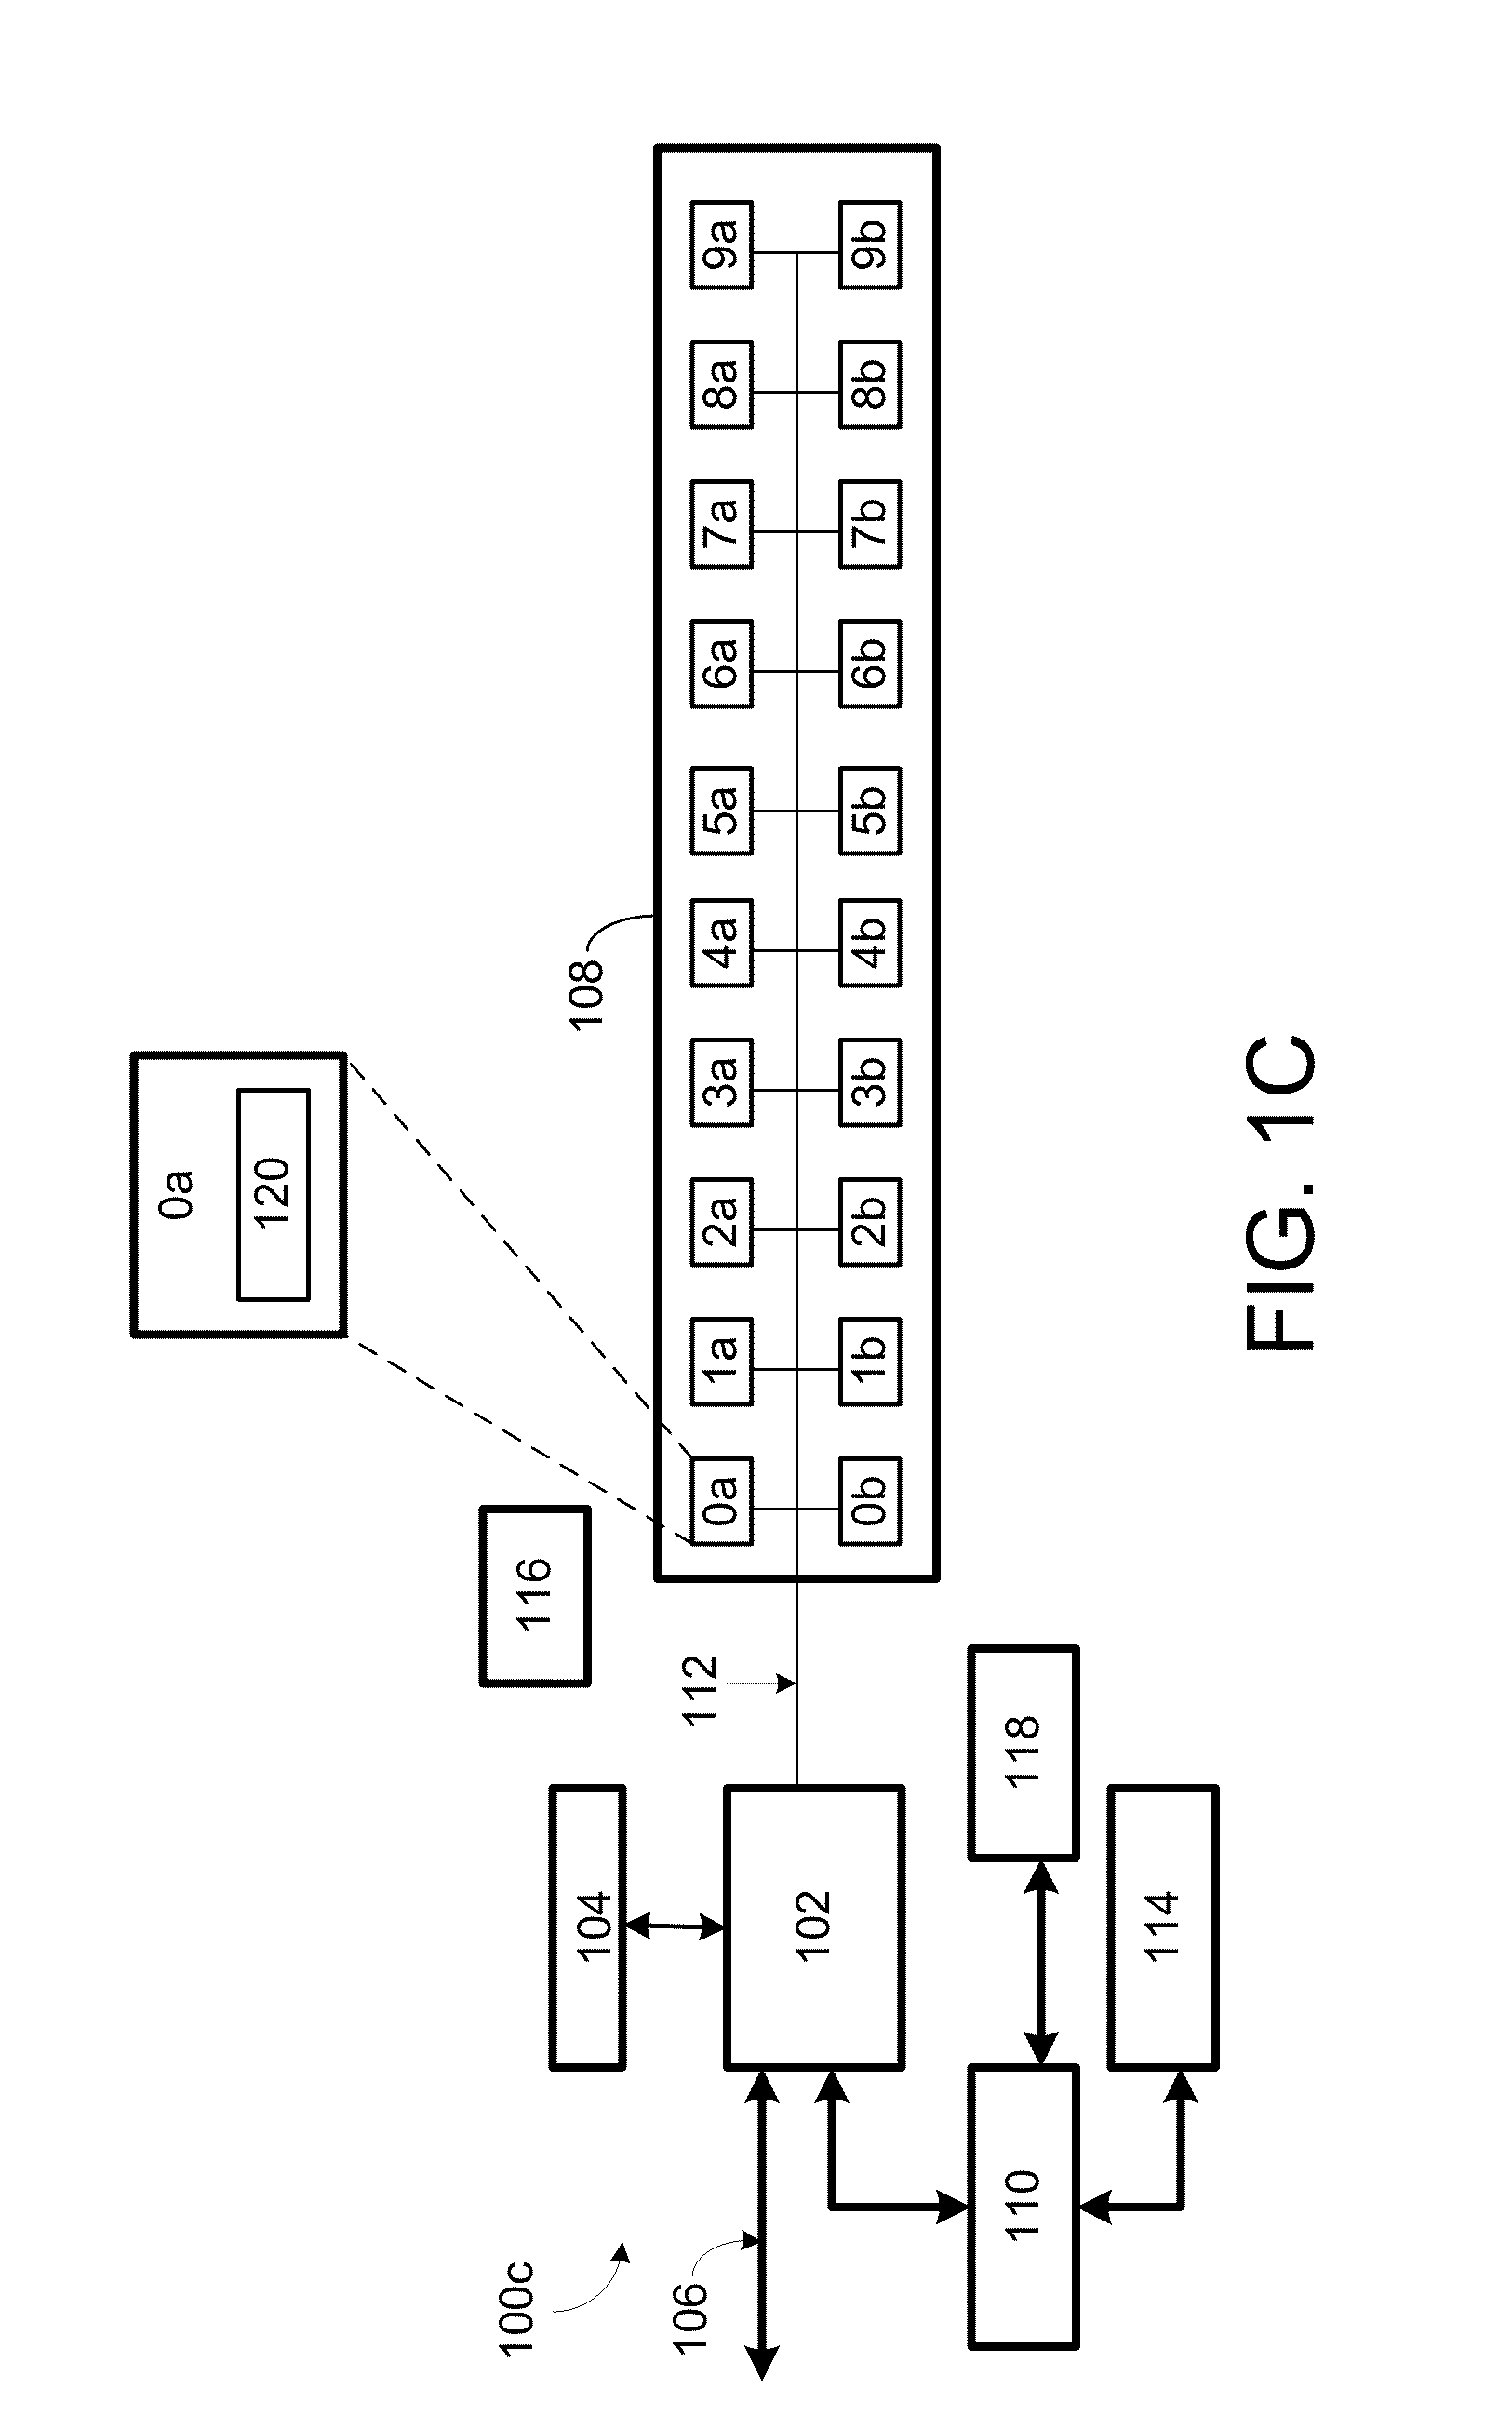 Encrypted flash-based data storage system with confidentiality mode